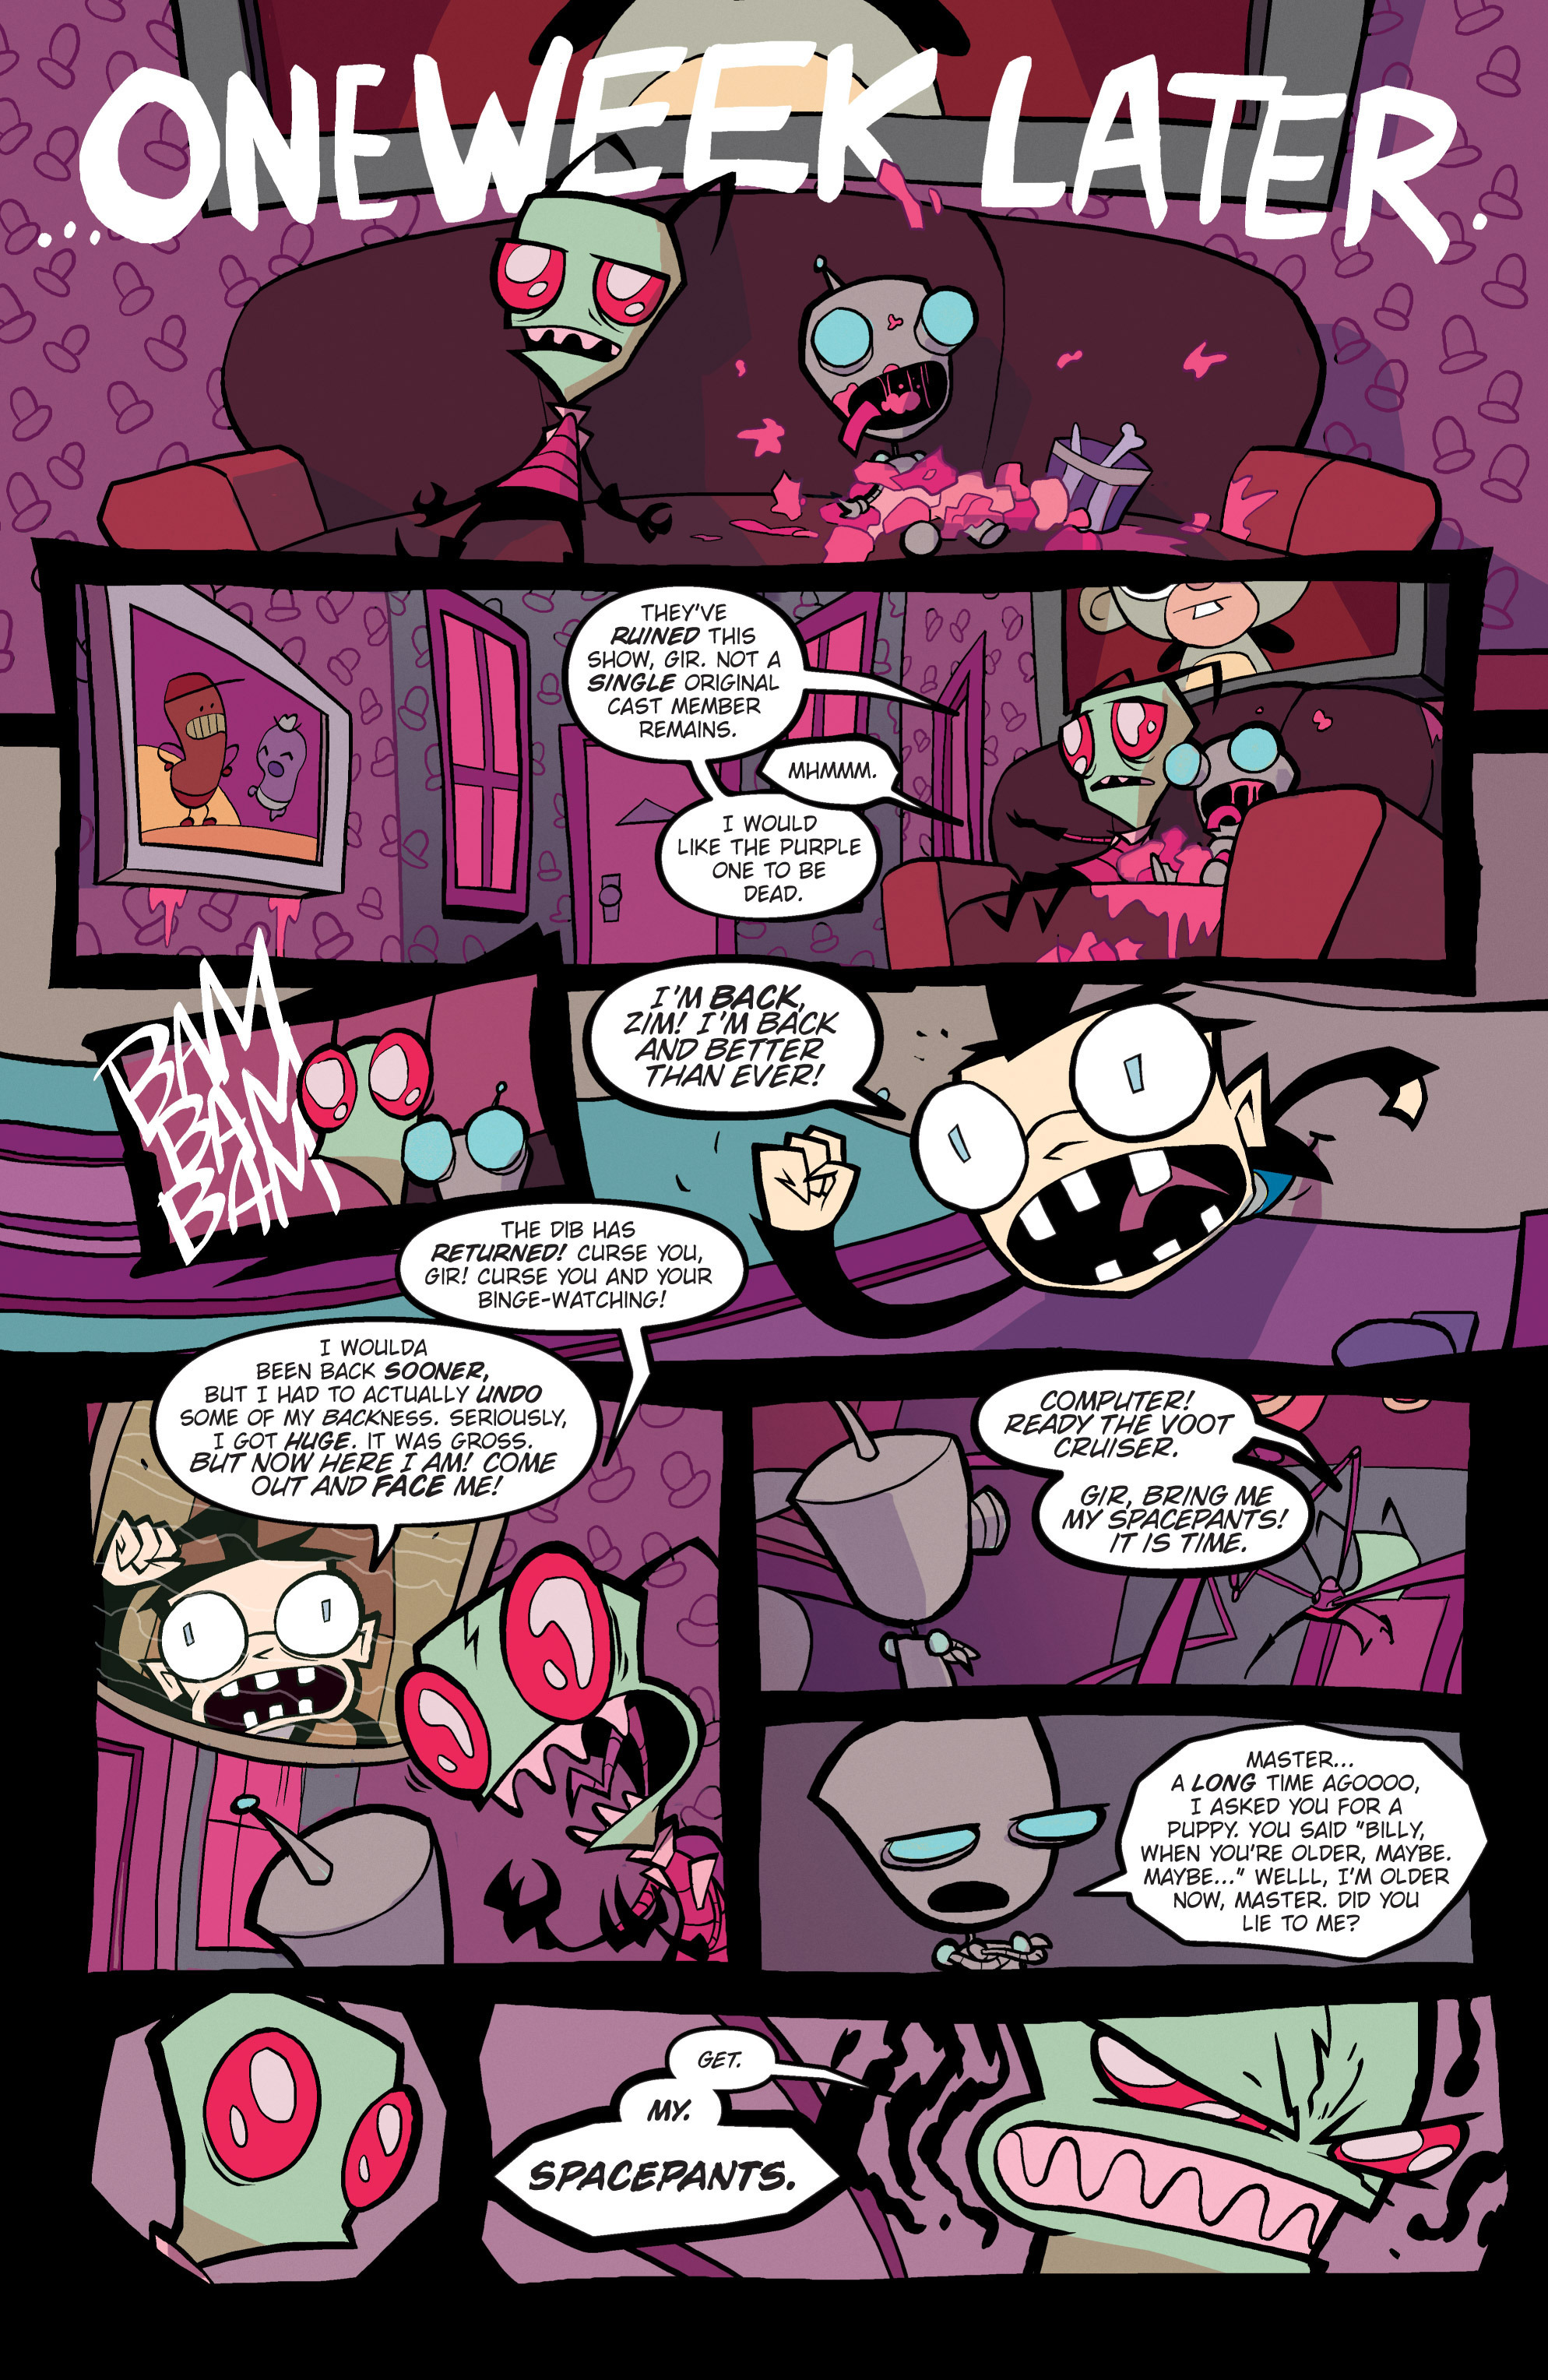 Invader Zim Issue 1 Read Invader Zim Issue 1 Comic Online In High Quality Read Full Comic